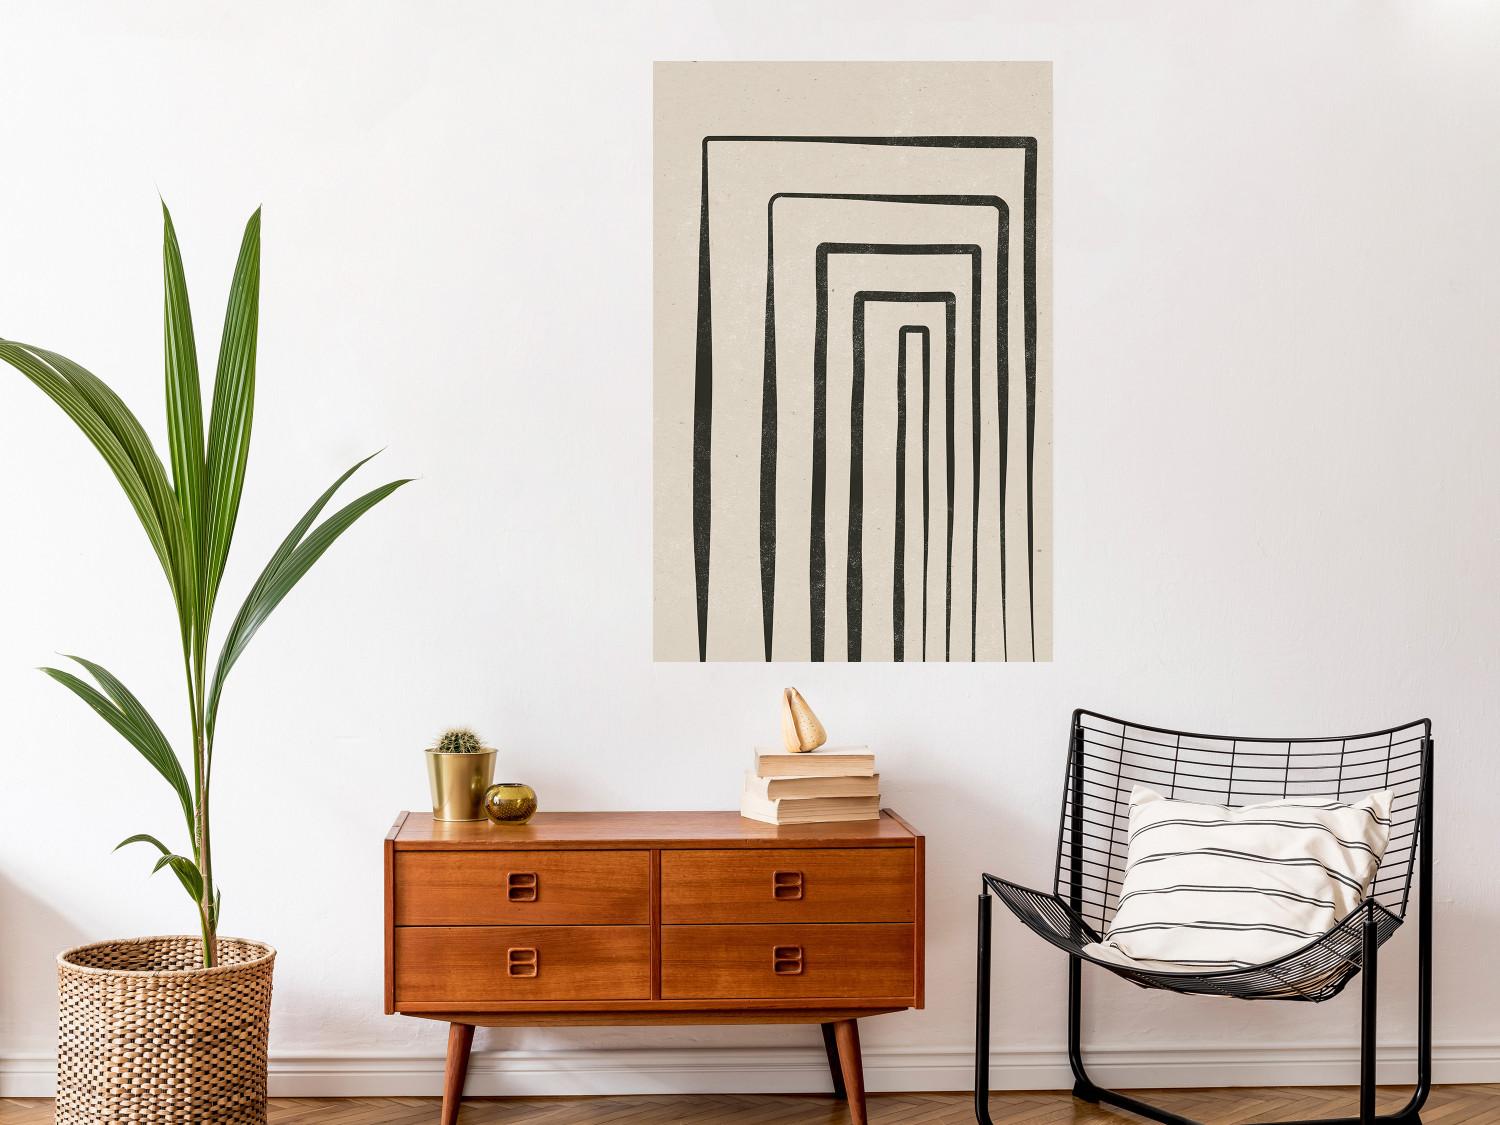 Poster High Colonnade - black lines creating patterns in abstract motif